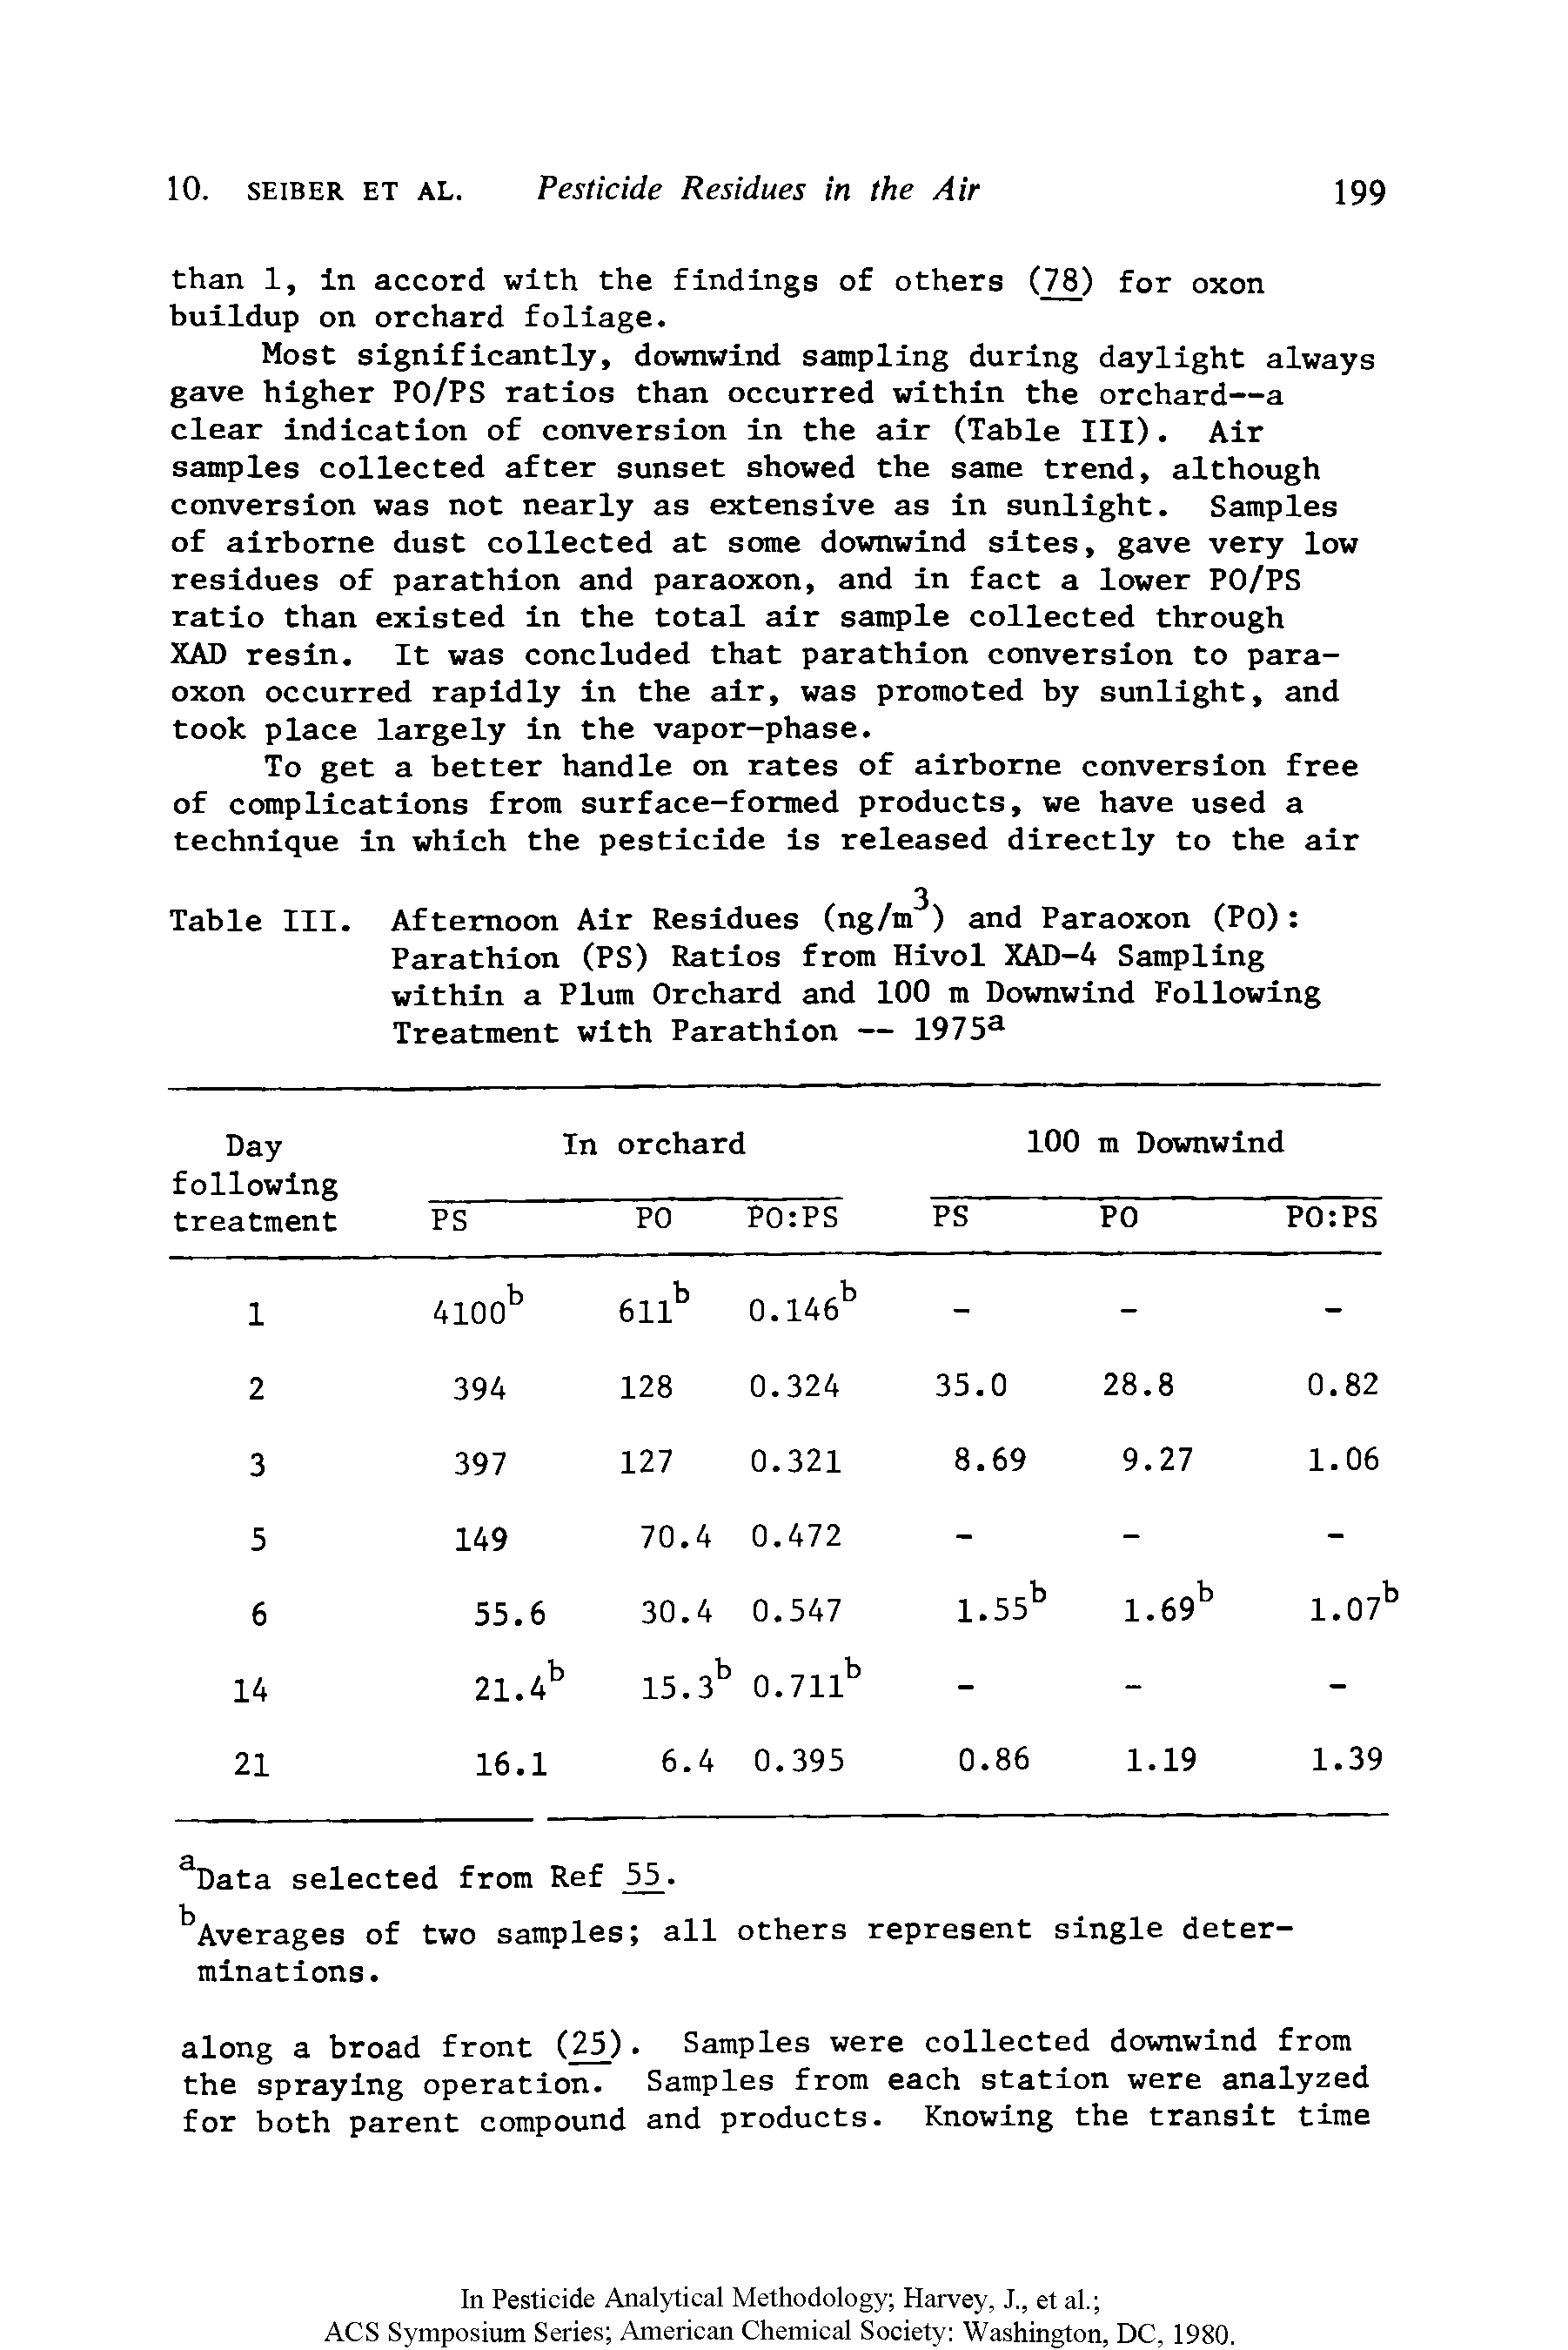 Table III. Afternoon Air Residues (ng/m ) and Paraoxon (PO) Parathion (PS) Ratios from Hivol XAD-4 Sampling within a Plum Orchard and 100 m Downwind Following Treatment with Parathion — 1975a...